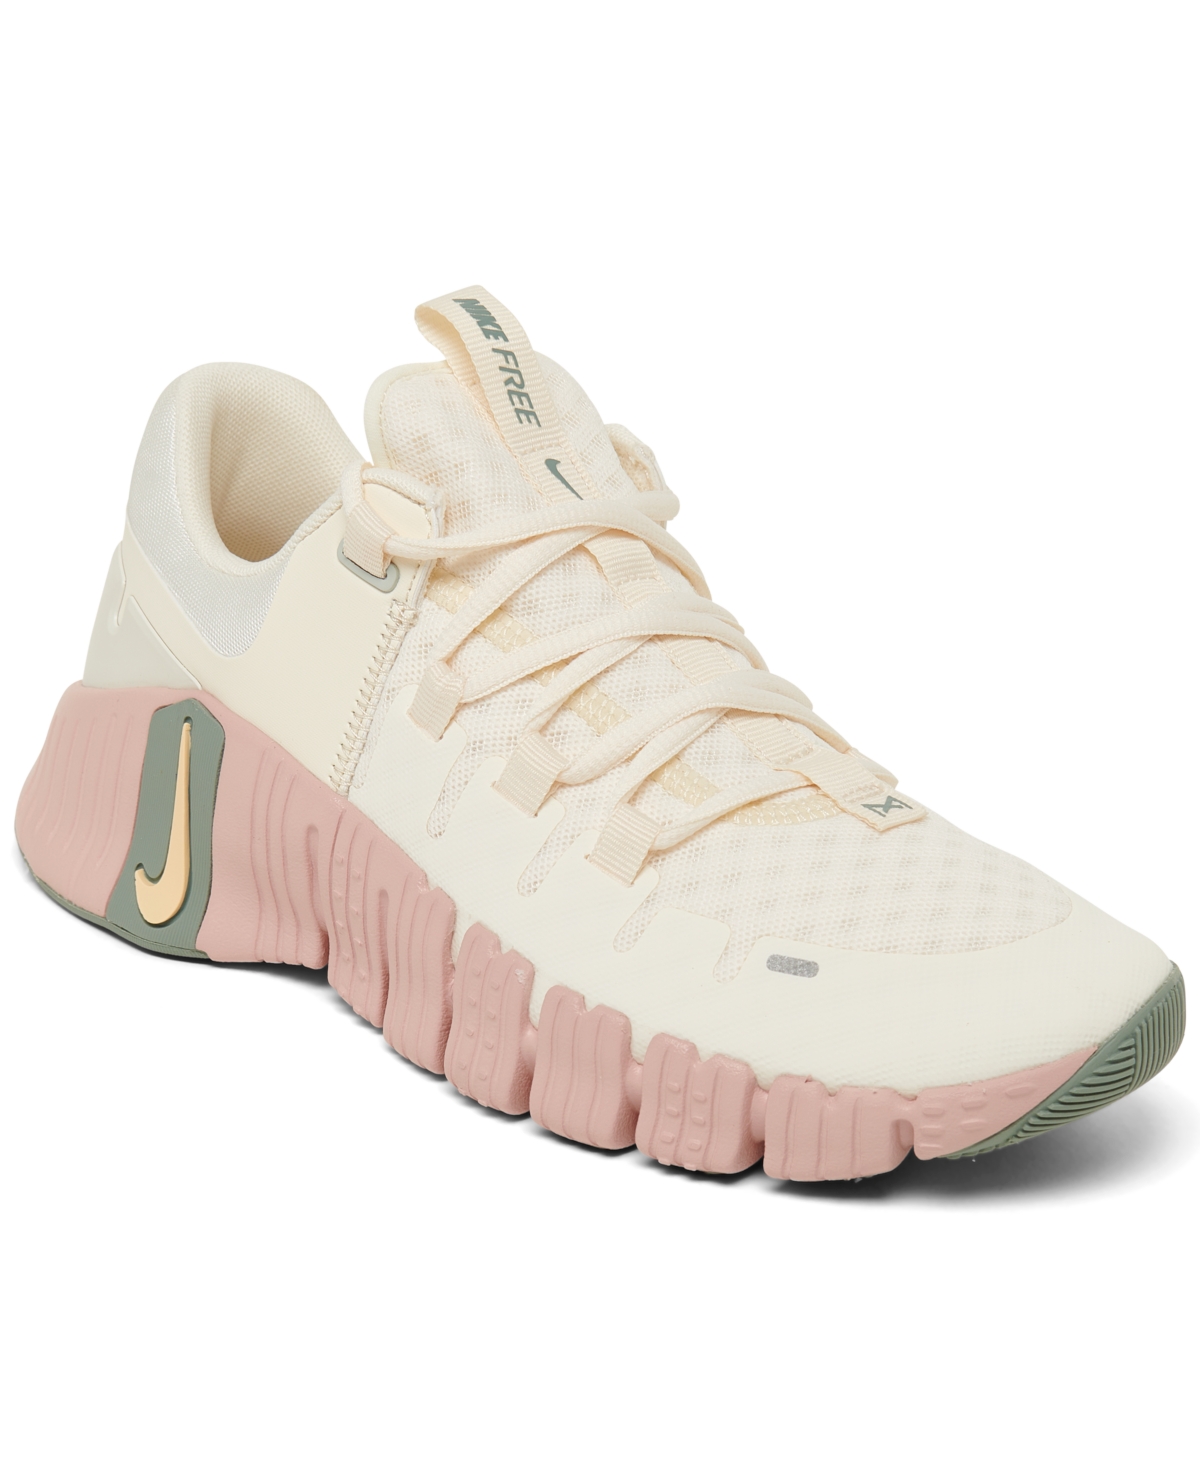 NIKE WOMEN'S FREE METCON 5 TRAINING SNEAKERS FROM FINISH LINE